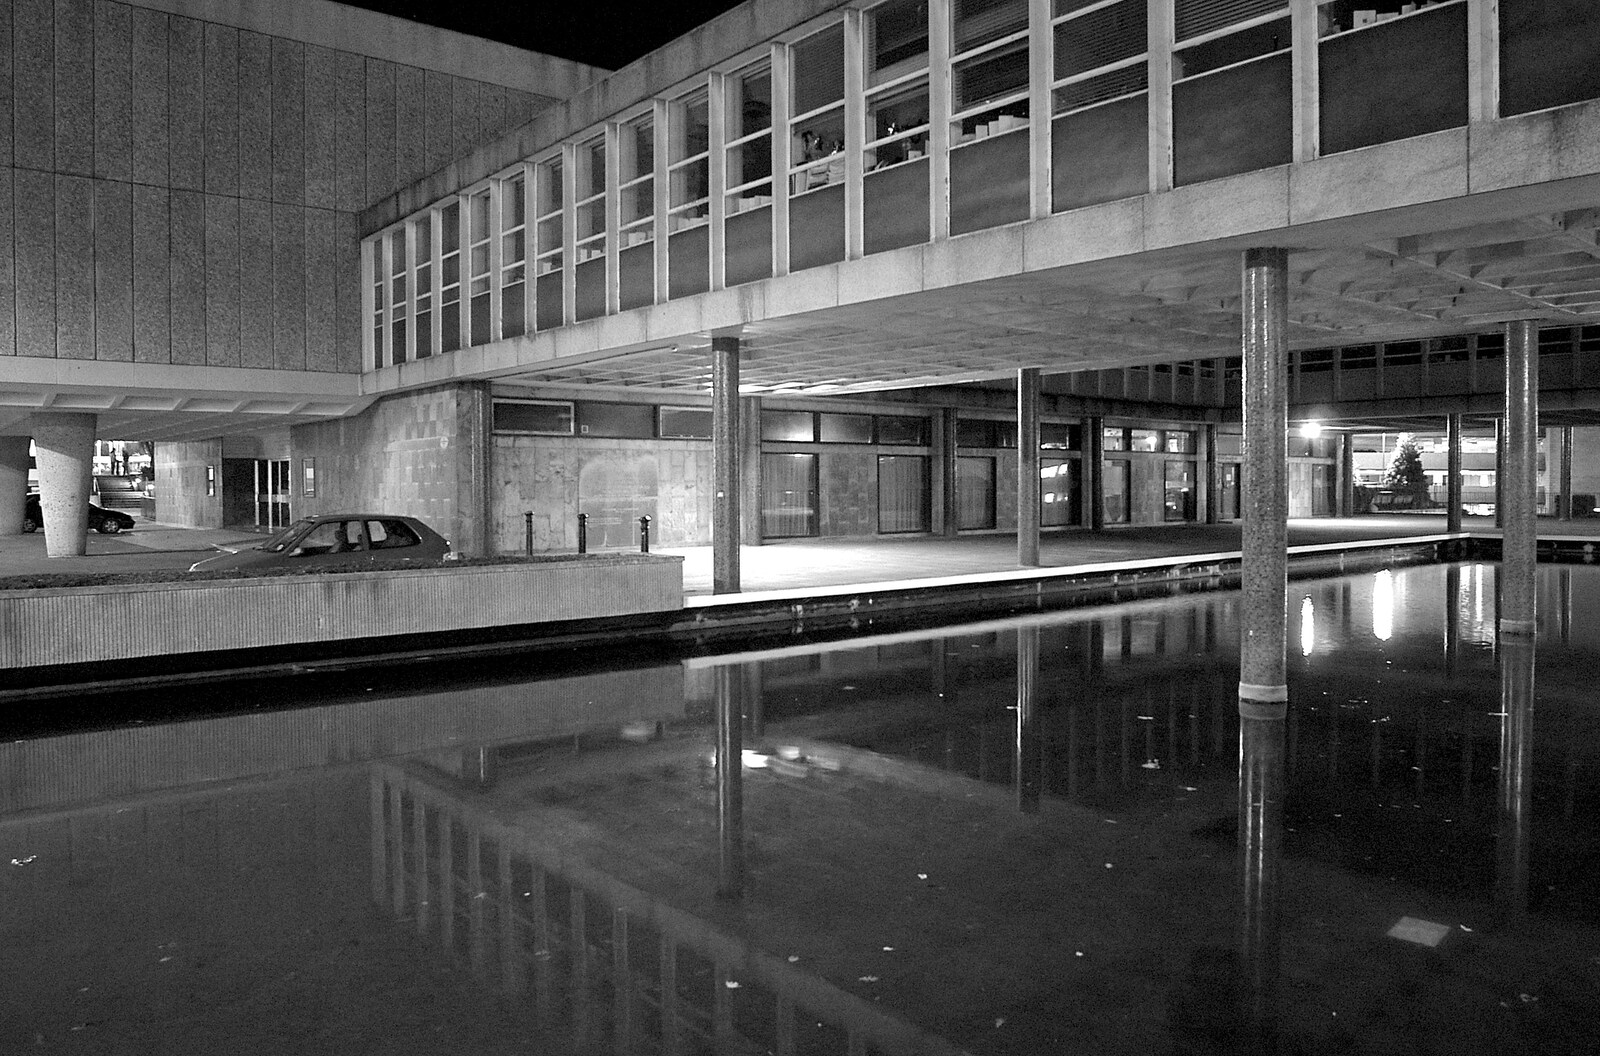 Stark 60s concrete in black and white from Uni: A Polytechnic Reunion, Plymouth, Devon - 17th December 2005